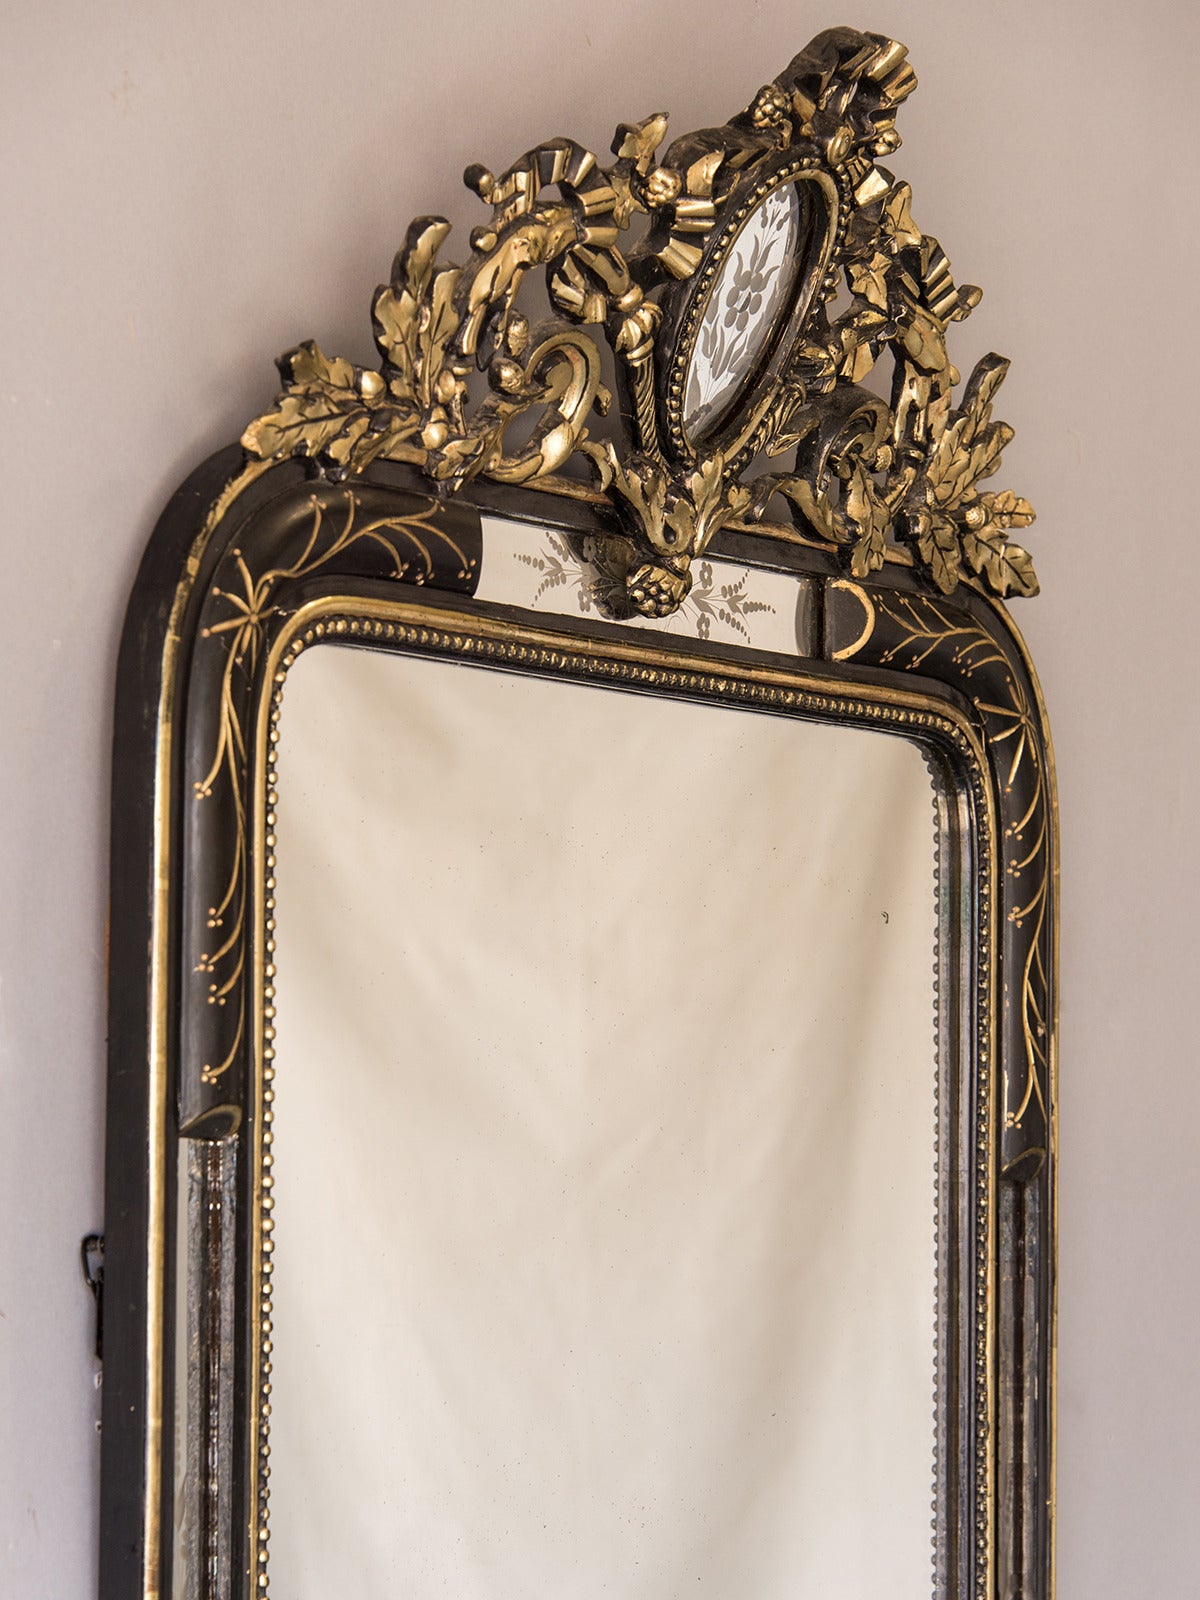 Receive our new selections direct from 1stdibs by email each week. Please click Follow Dealer below and see them first!

The sheer design exuberance in this antique French mirror perfectly embodies the spirit of life when Napoleon III reigned in